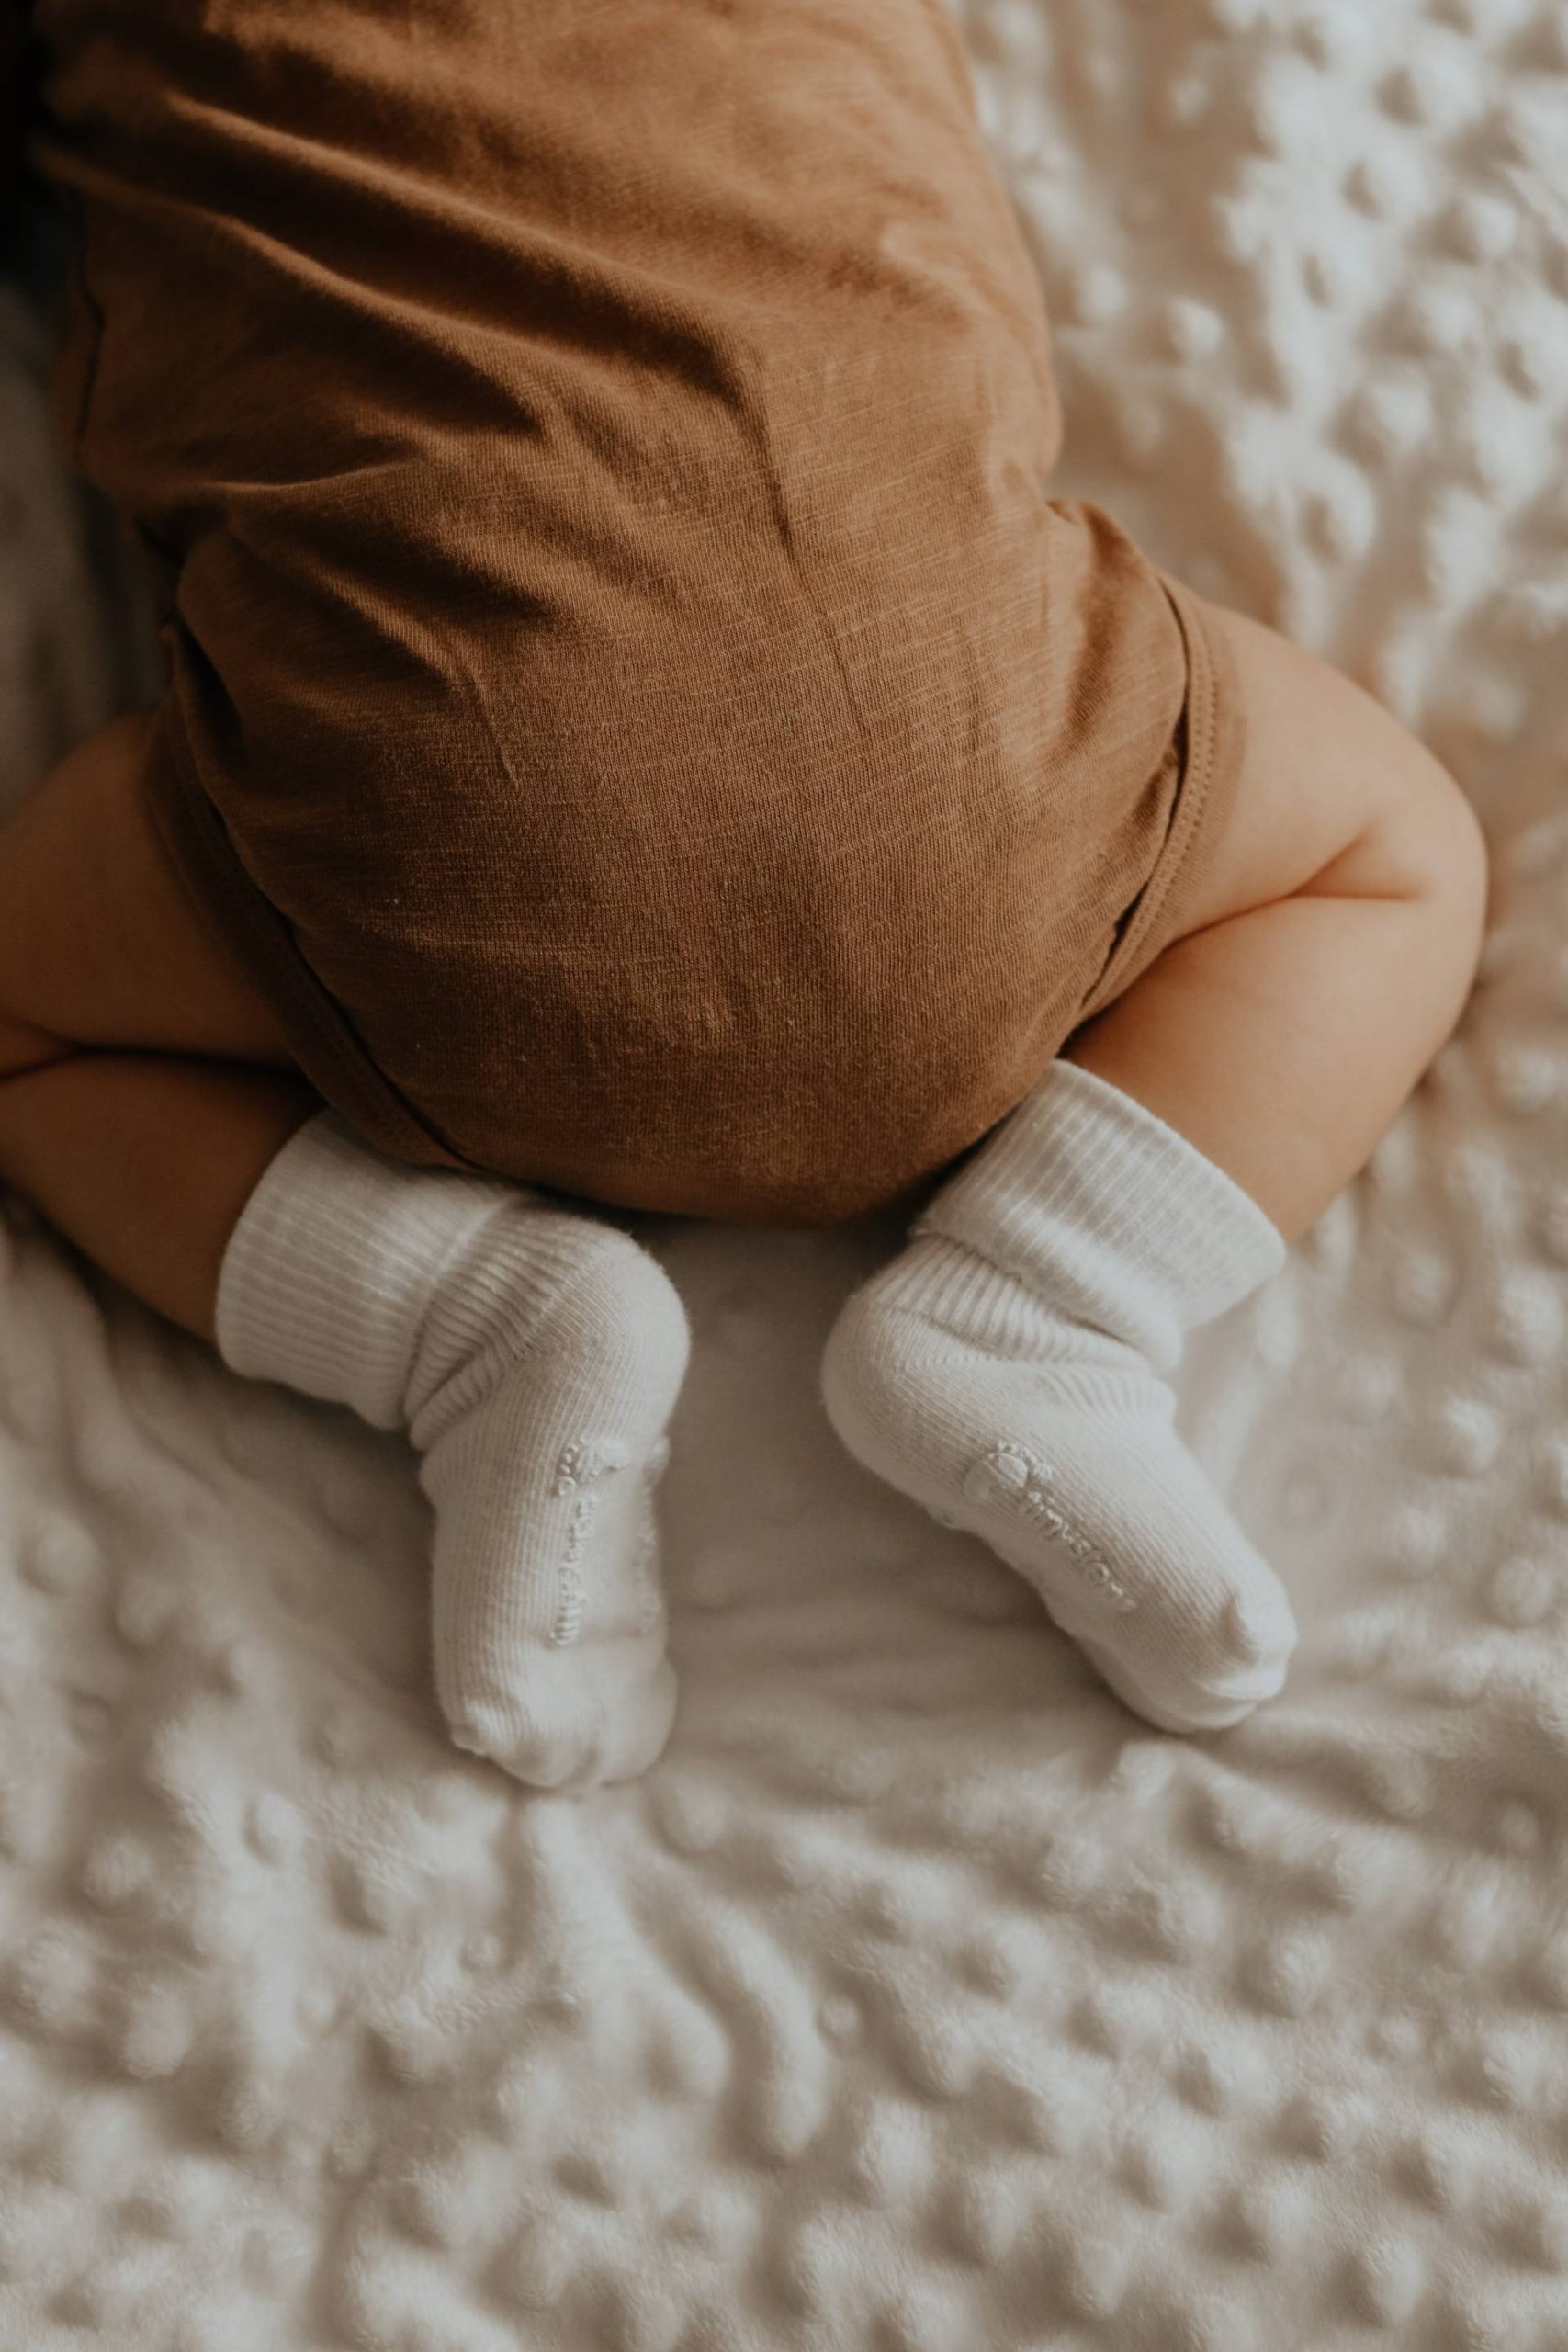 close up shot of newborn baby laid on tummy with legs tucked under wearing white socks and brown babygrow